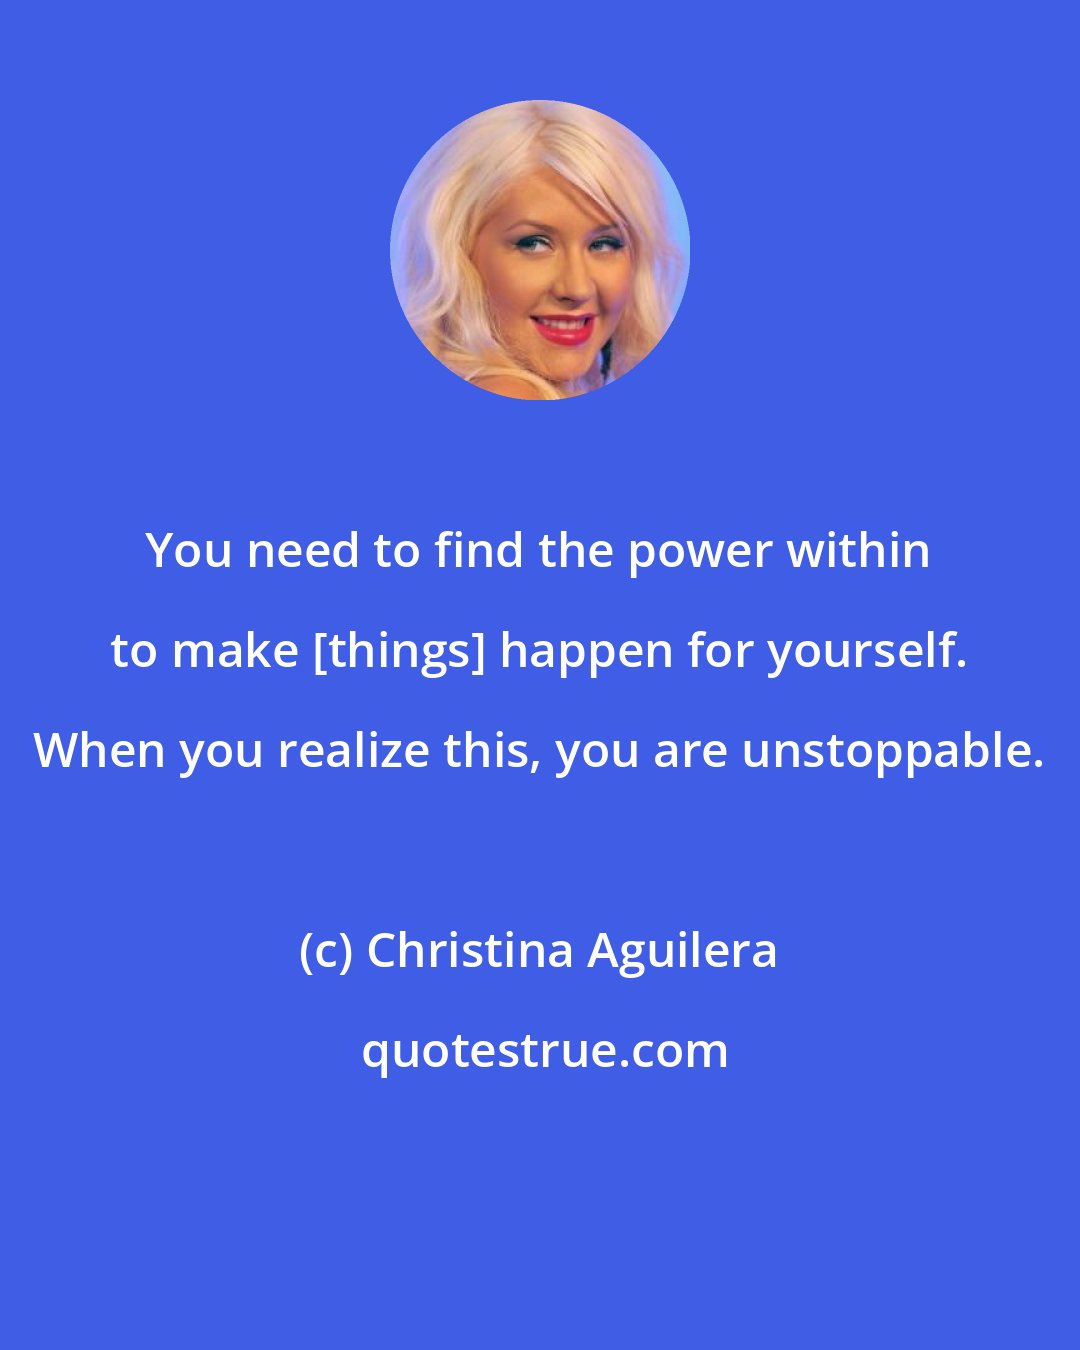 Christina Aguilera: You need to find the power within to make [things] happen for yourself. When you realize this, you are unstoppable.